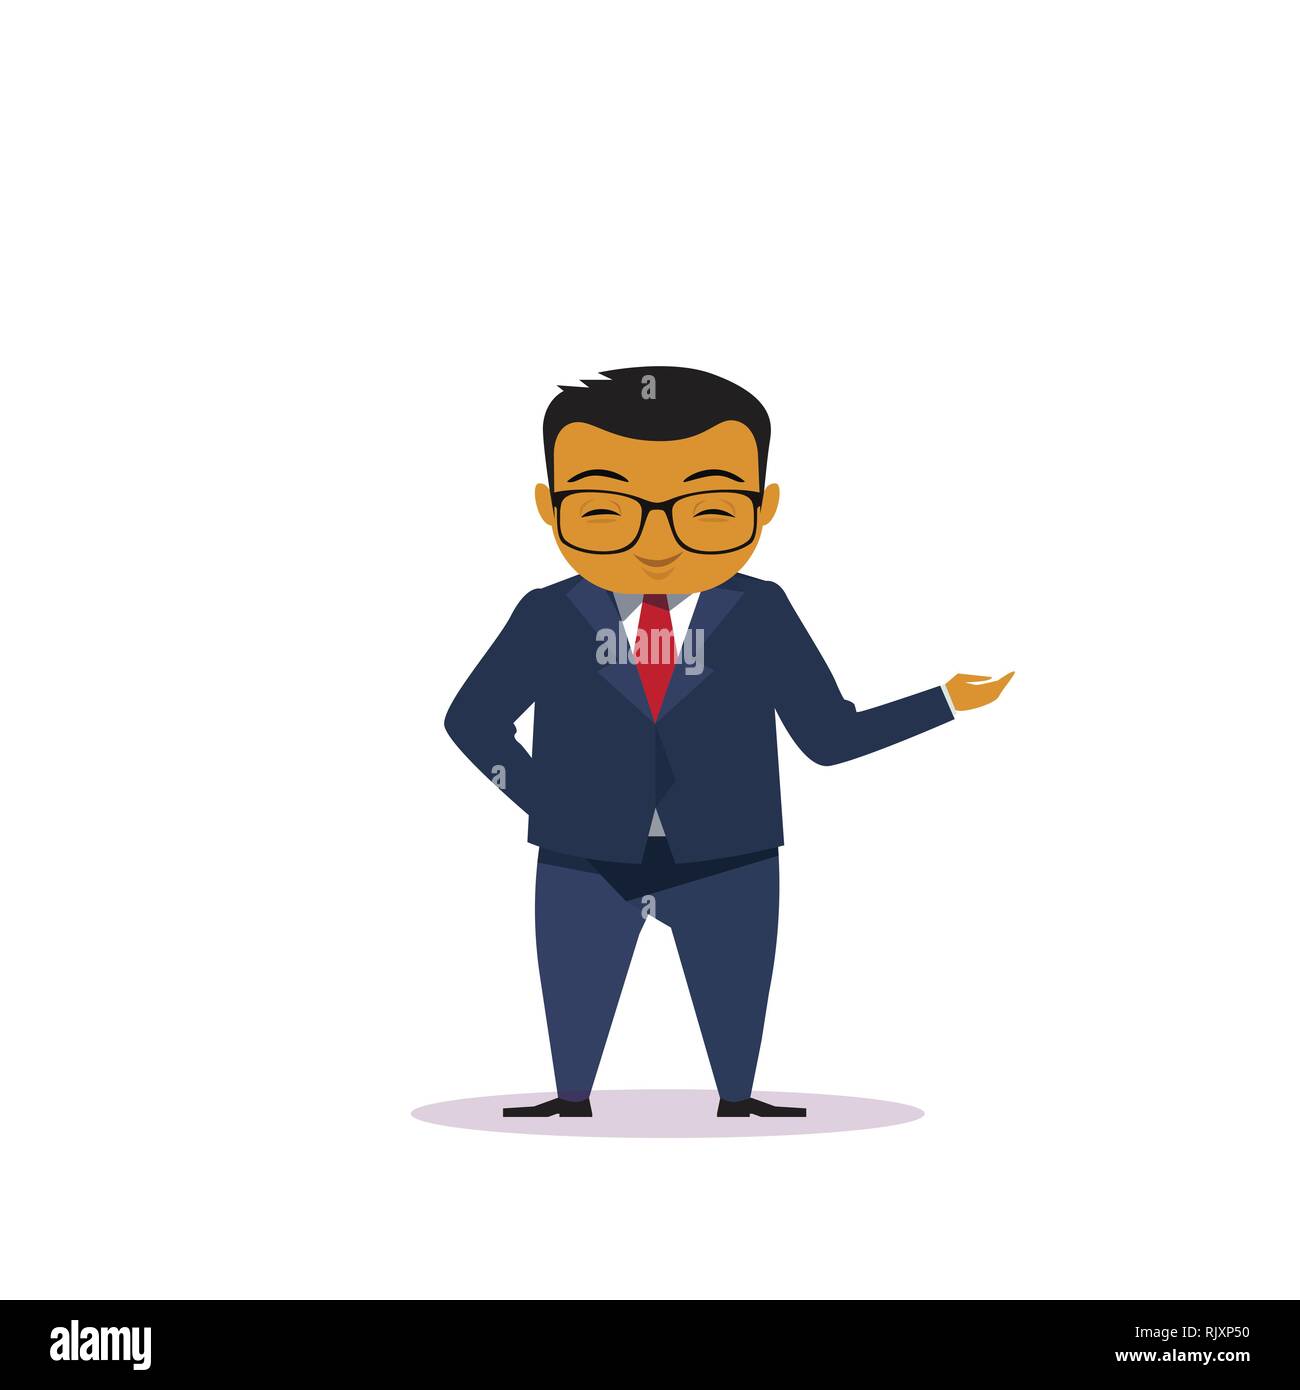 Cartoon Asian Business Man Holding Hand Gesture Presenting Or Showing Isolated Over White Background Stock Vector